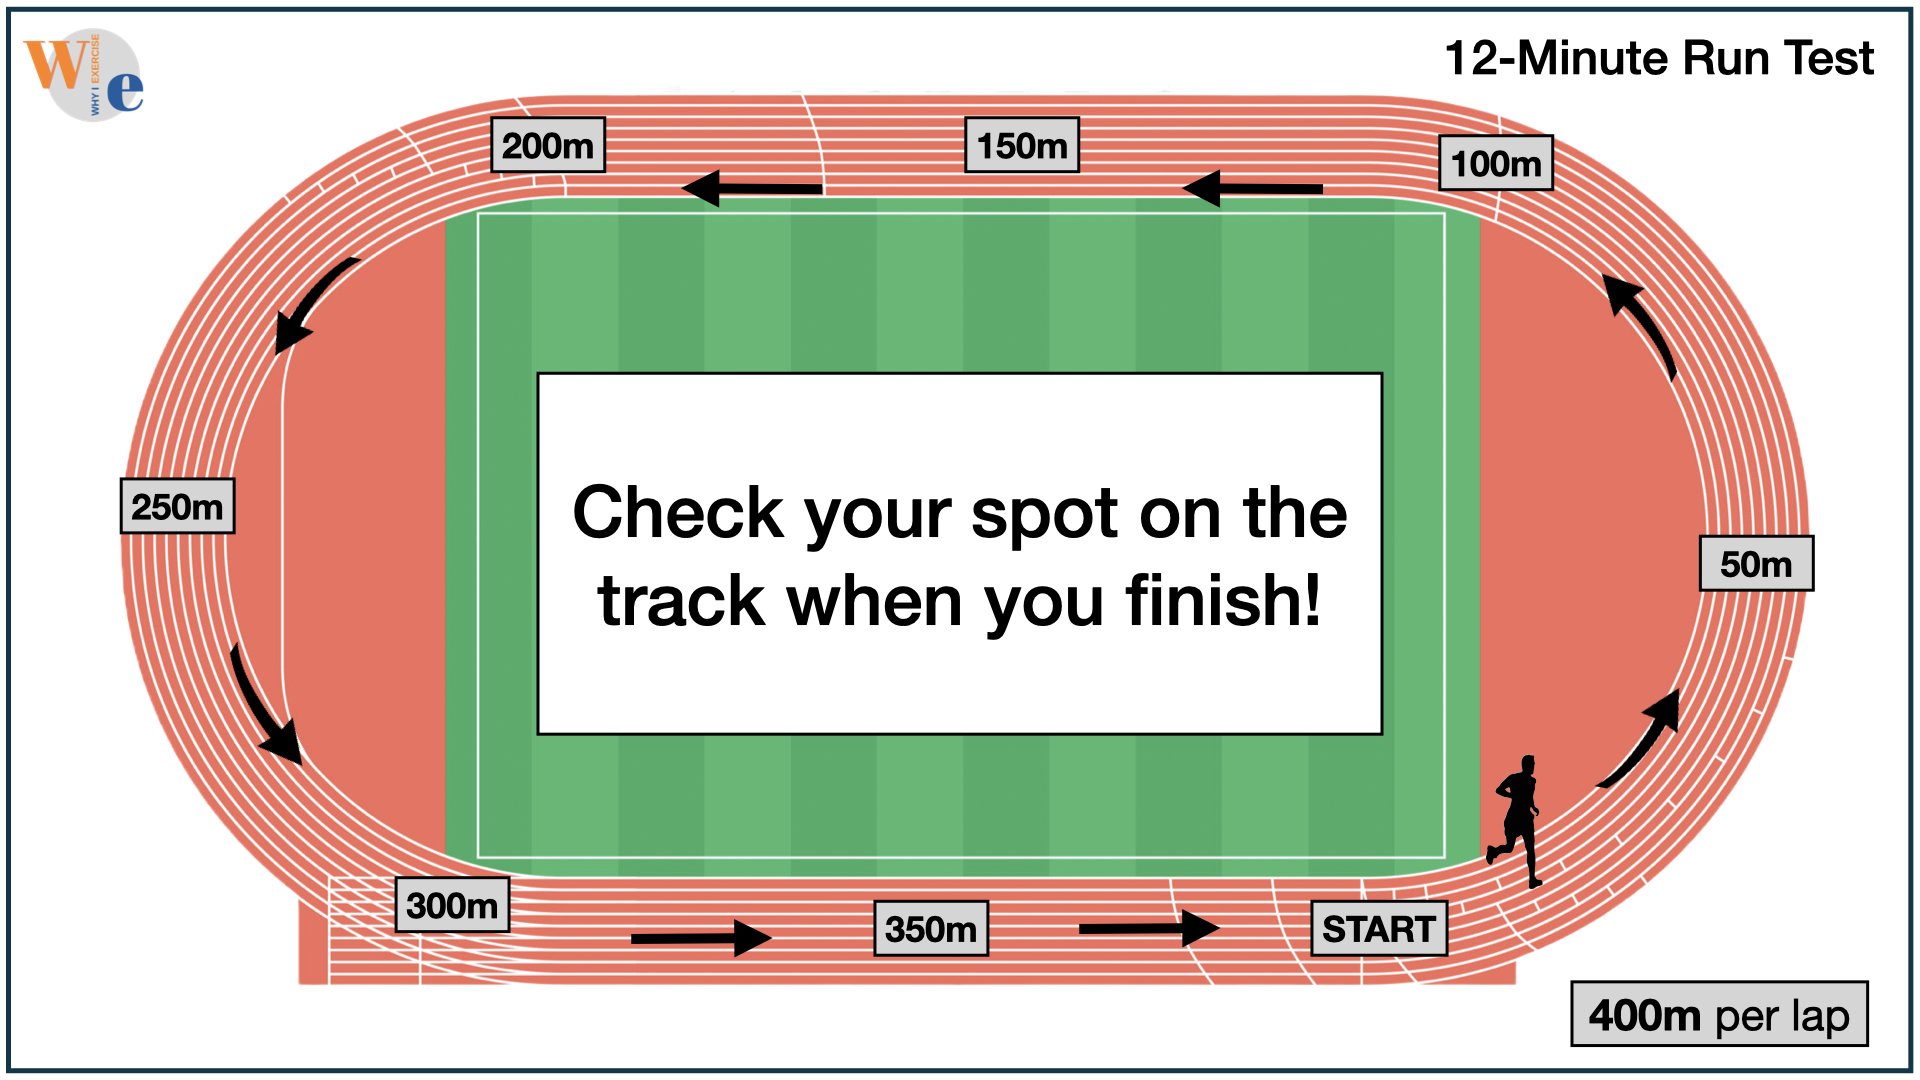 12-minute run, check your spot on the track when you finish!